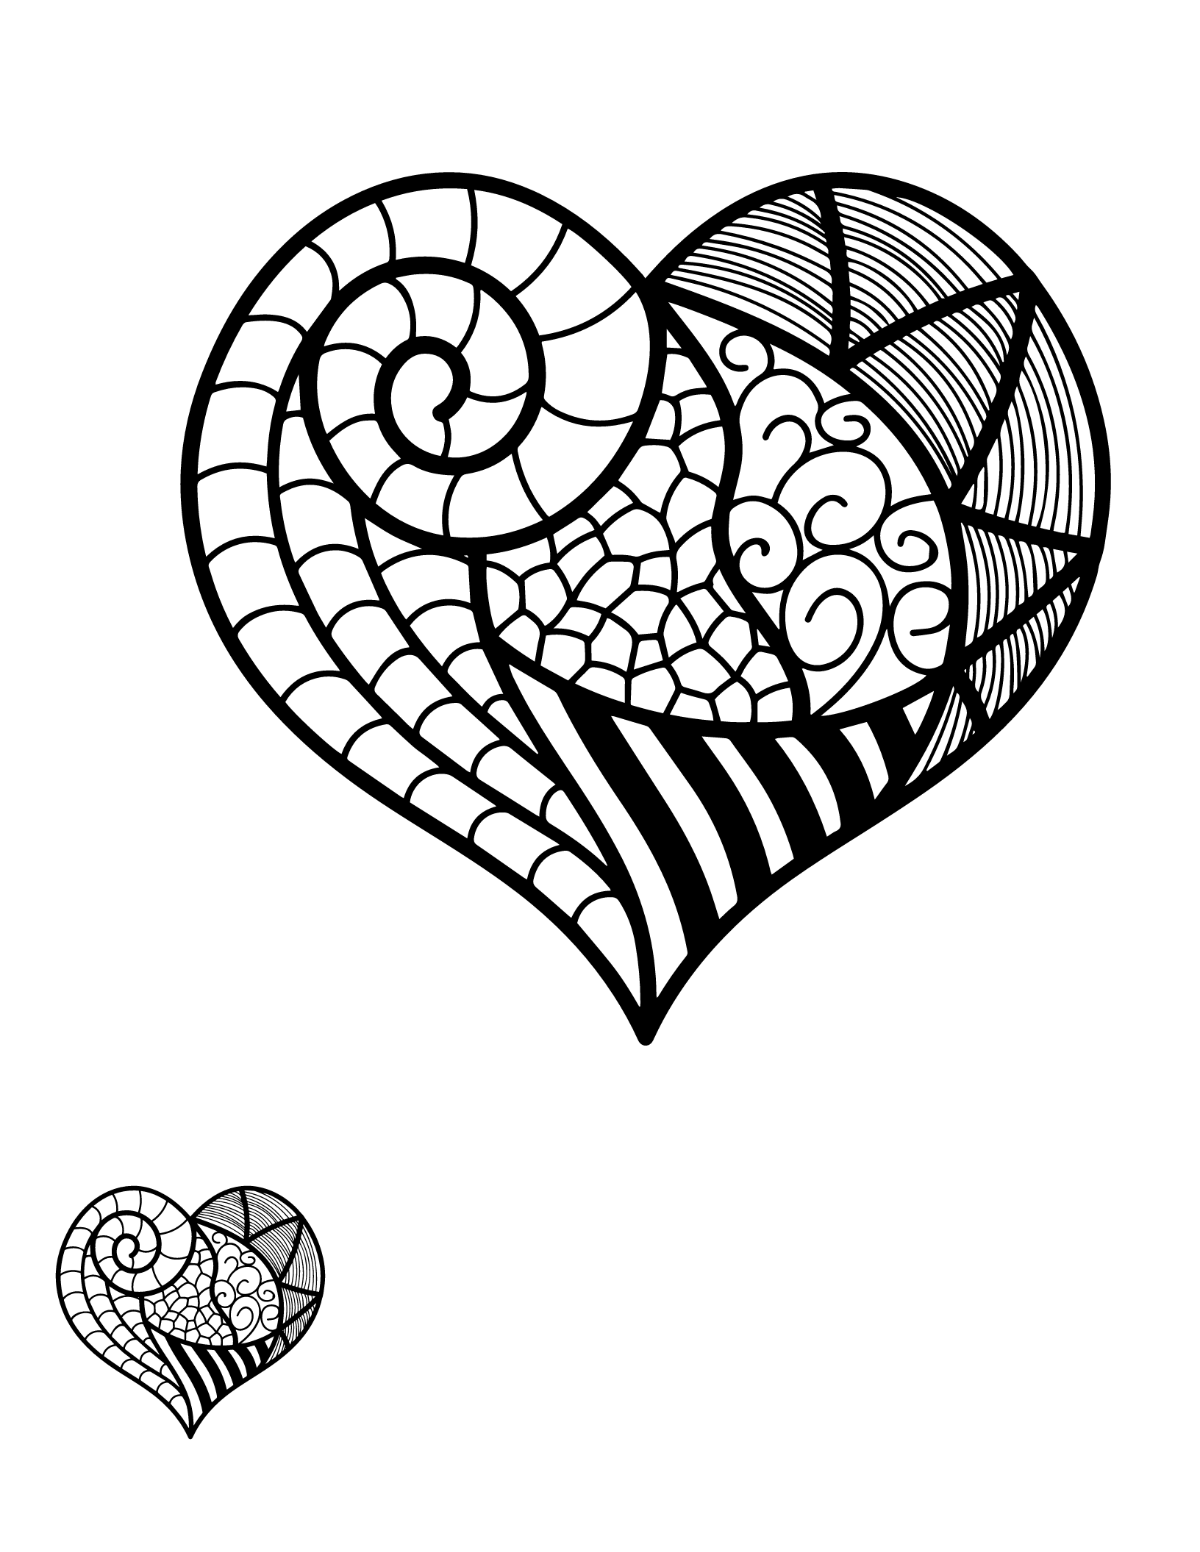 Zentangle Heart Coloring Page for Adults Template